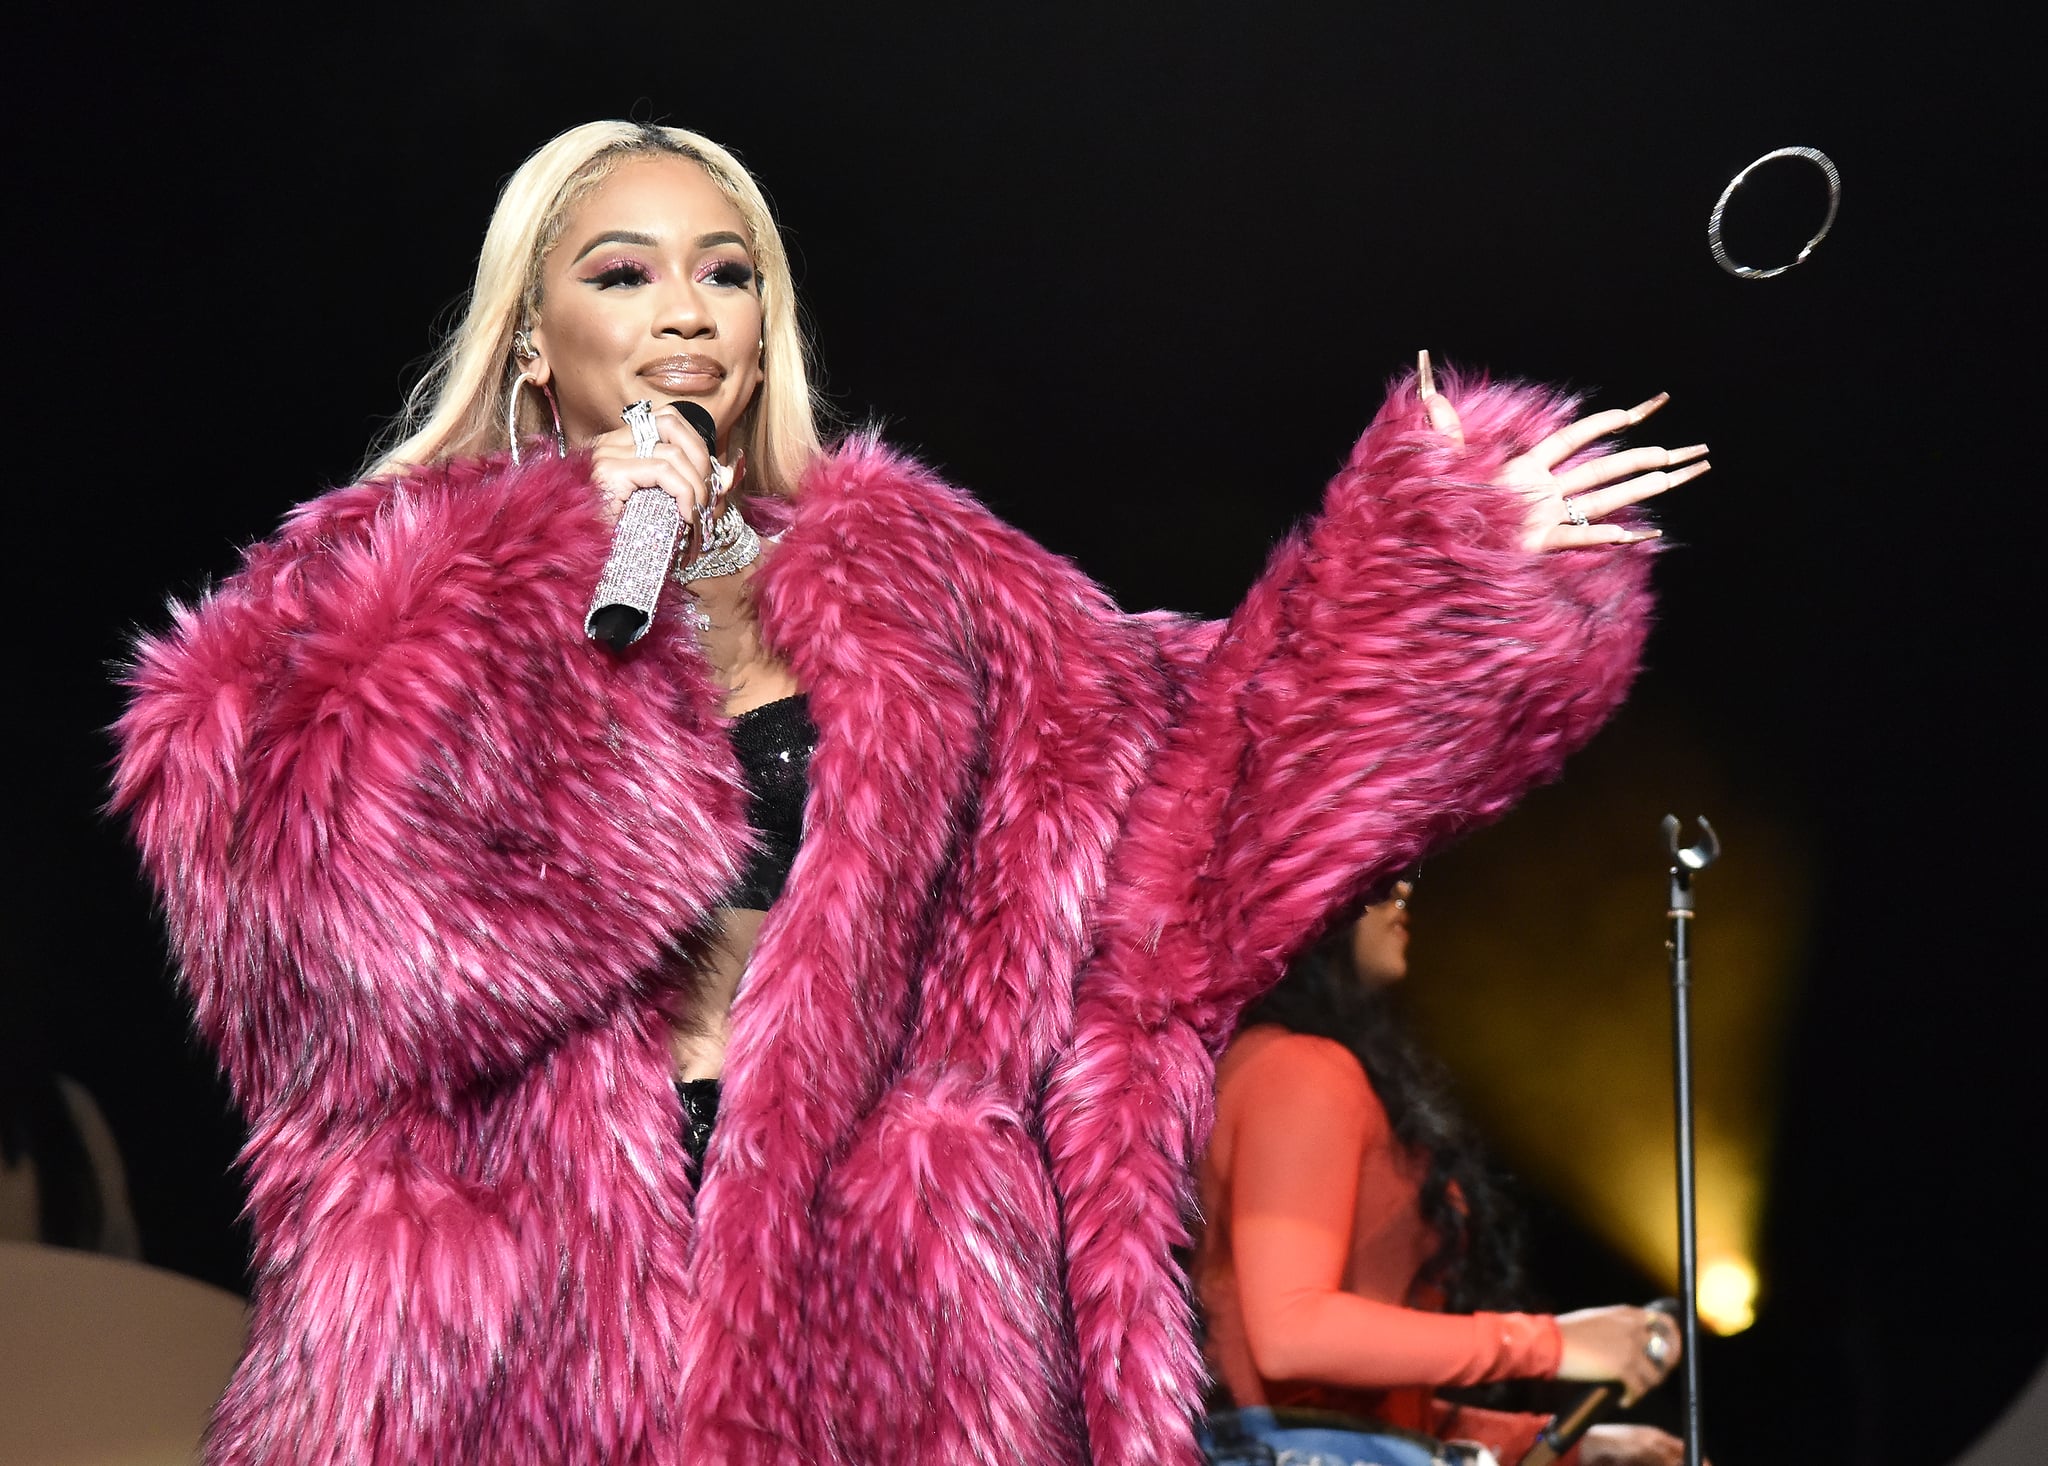 CONCORD, CALIFORNIA - SEPTEMBER 19: Saweetie performs during the 2021 Lights On music festival at Concord Pavilion on September 19, 2021 in Concord, California. (Photo by Tim Mosenfelder/Getty Images)